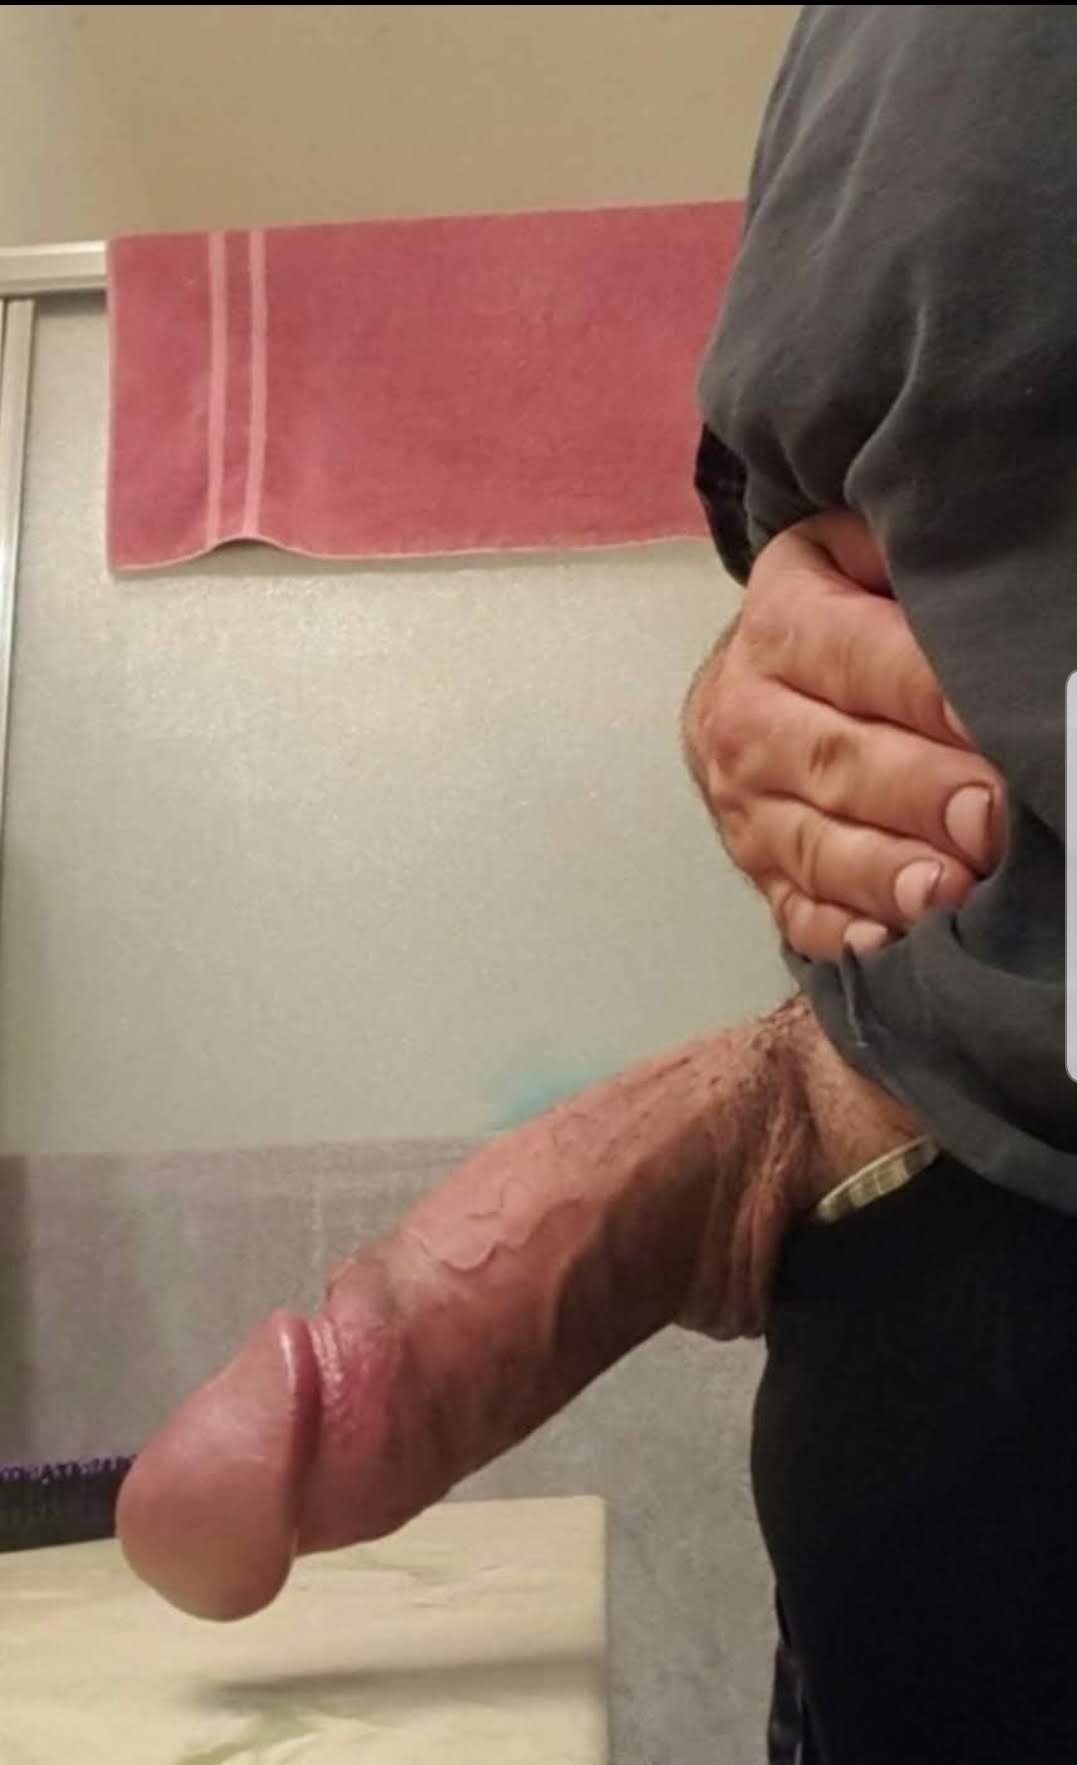 Watch the Photo by Rasz67 with the username @Rasz67, posted on October 31, 2019. The post is about the topic Rate my pussy or dick. and the text says 'What you think about this #fatcock? 
#big #veiny #thick #hung #cock'